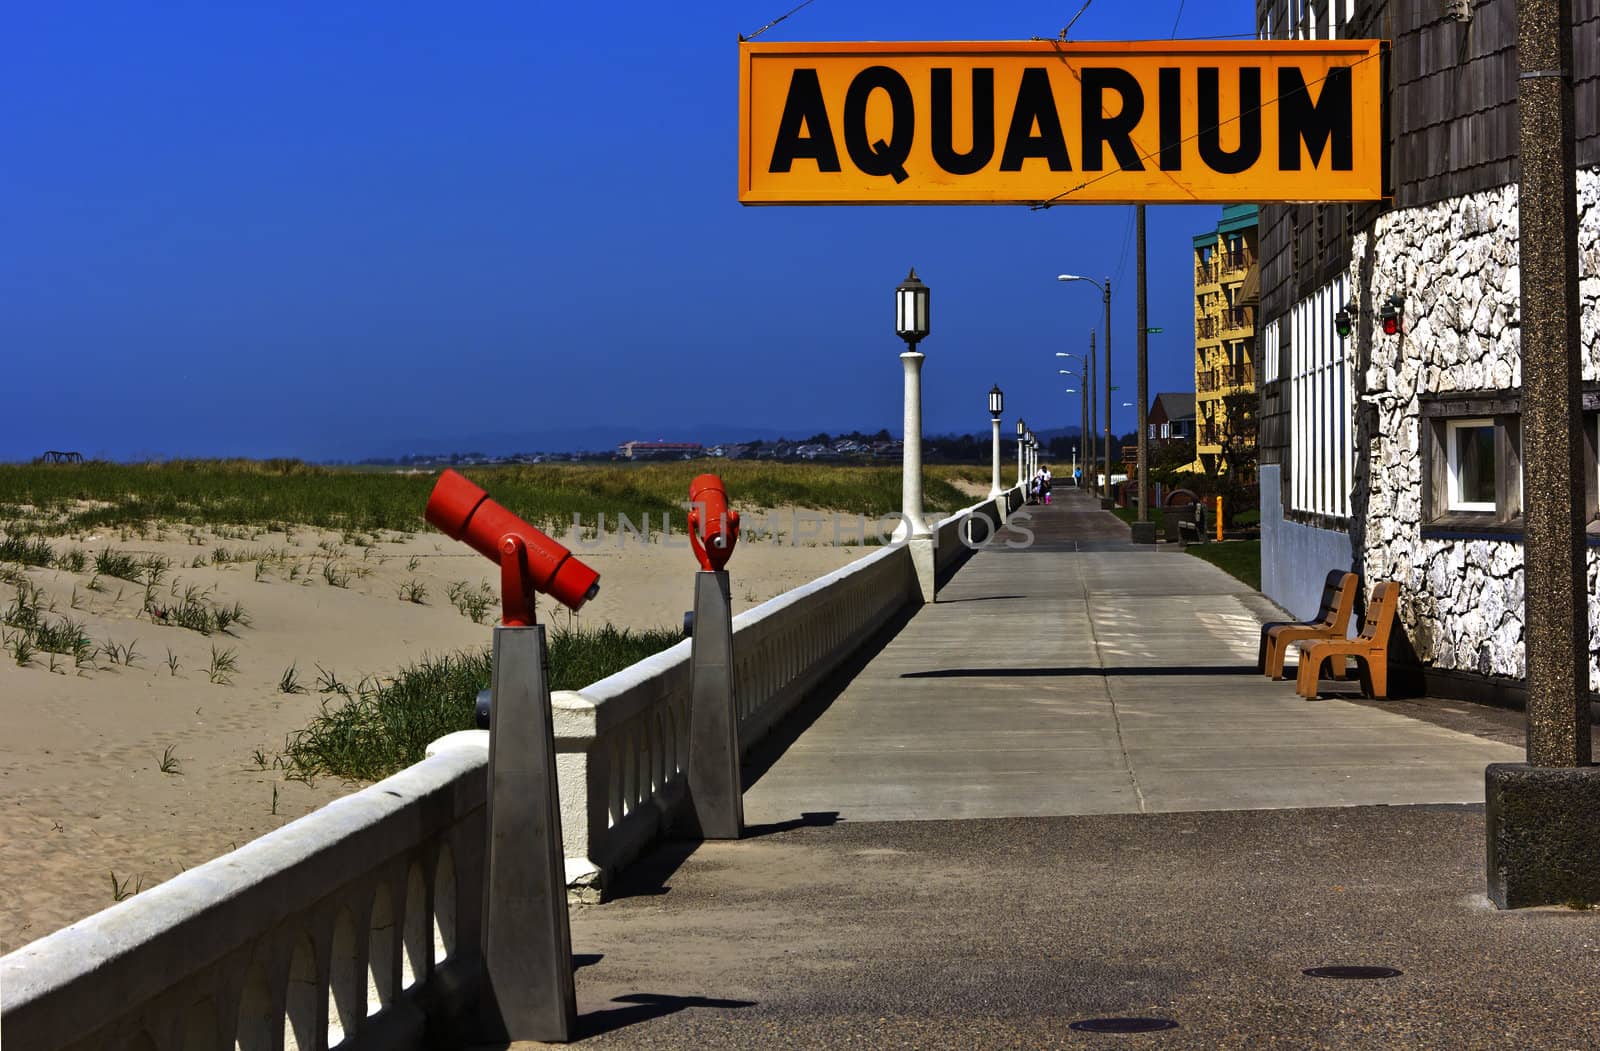 The boardwalk and the aquarium store Seaside OR. by Rigucci